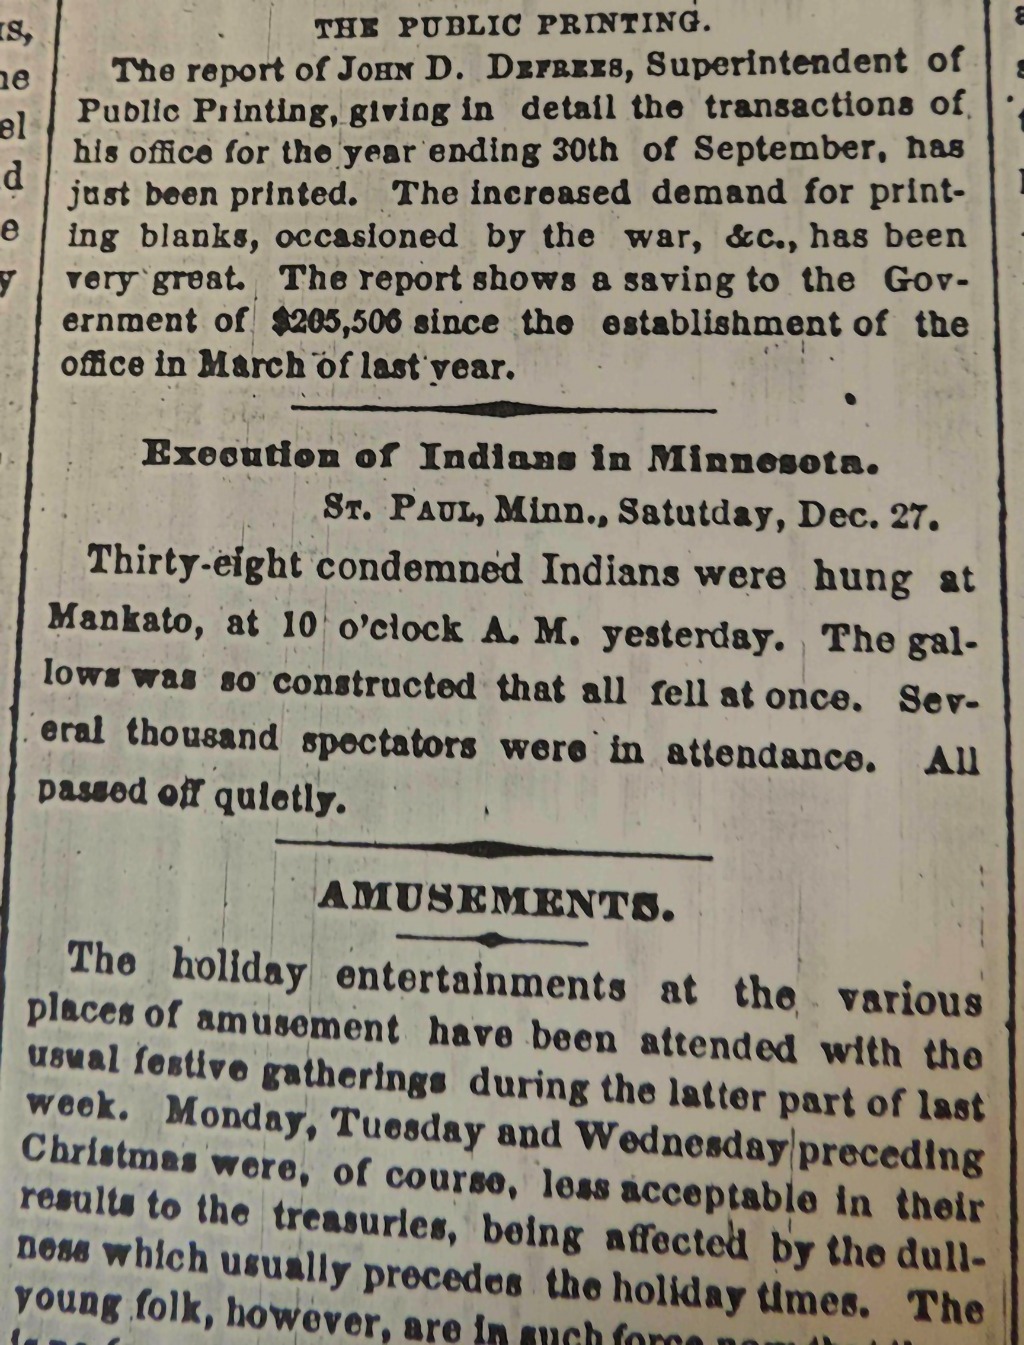 This one paragraph is the only notice of the execution in the New York Times, sandwiched between a brief announcing the release of a report on Public Printing and an item on holiday entertainments. It appeared in the December 29, 1862 edition.